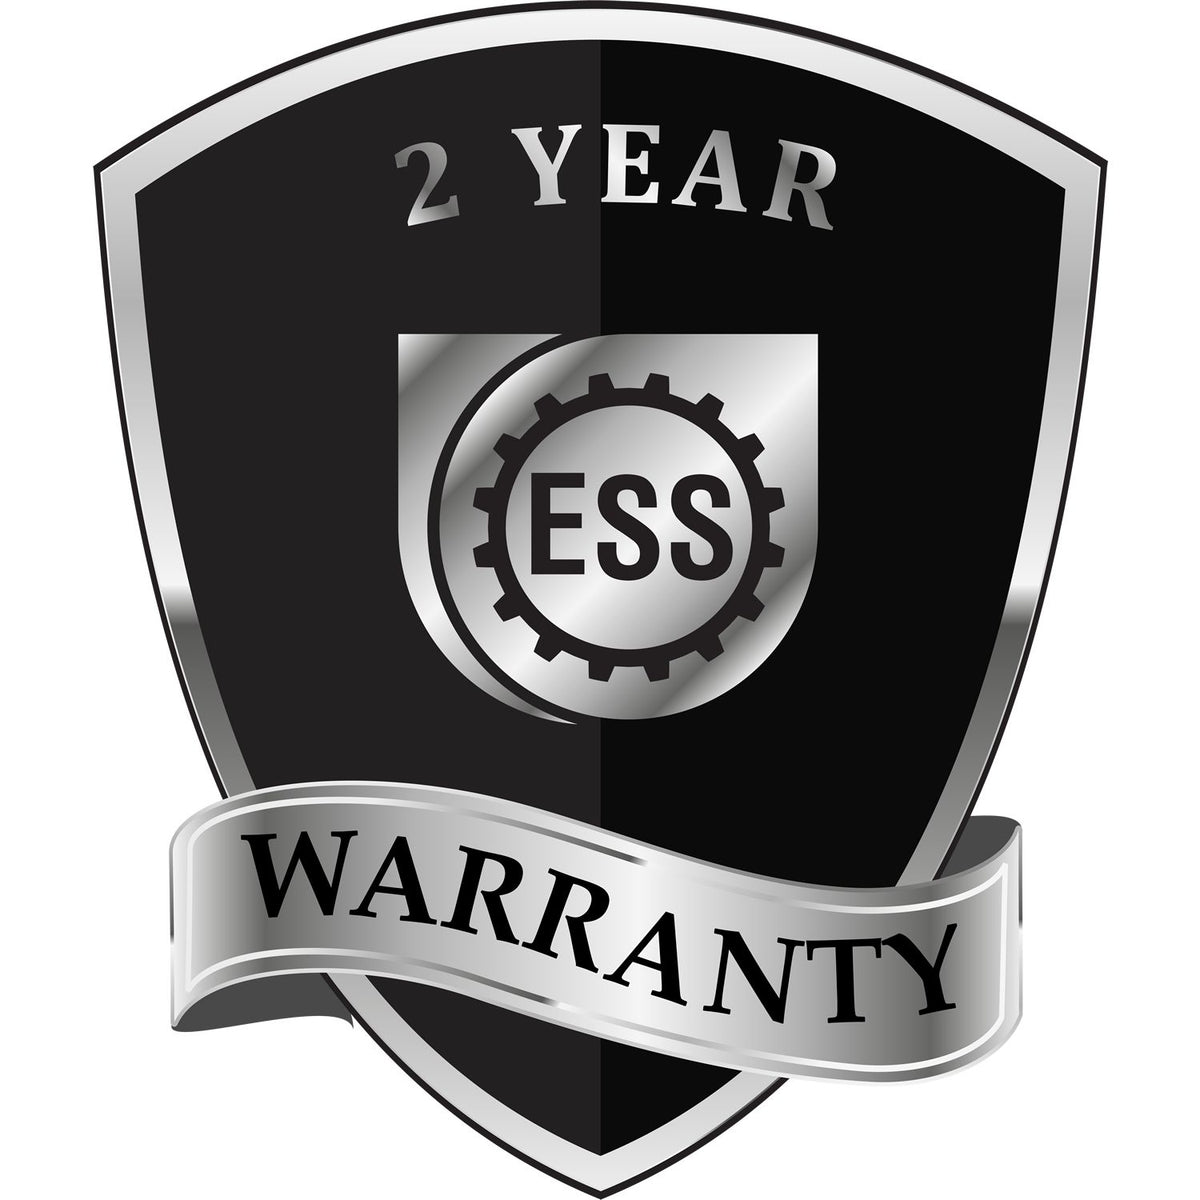 A black and silver badge or emblem showing warranty information for the Gift Michigan Land Surveyor Seal